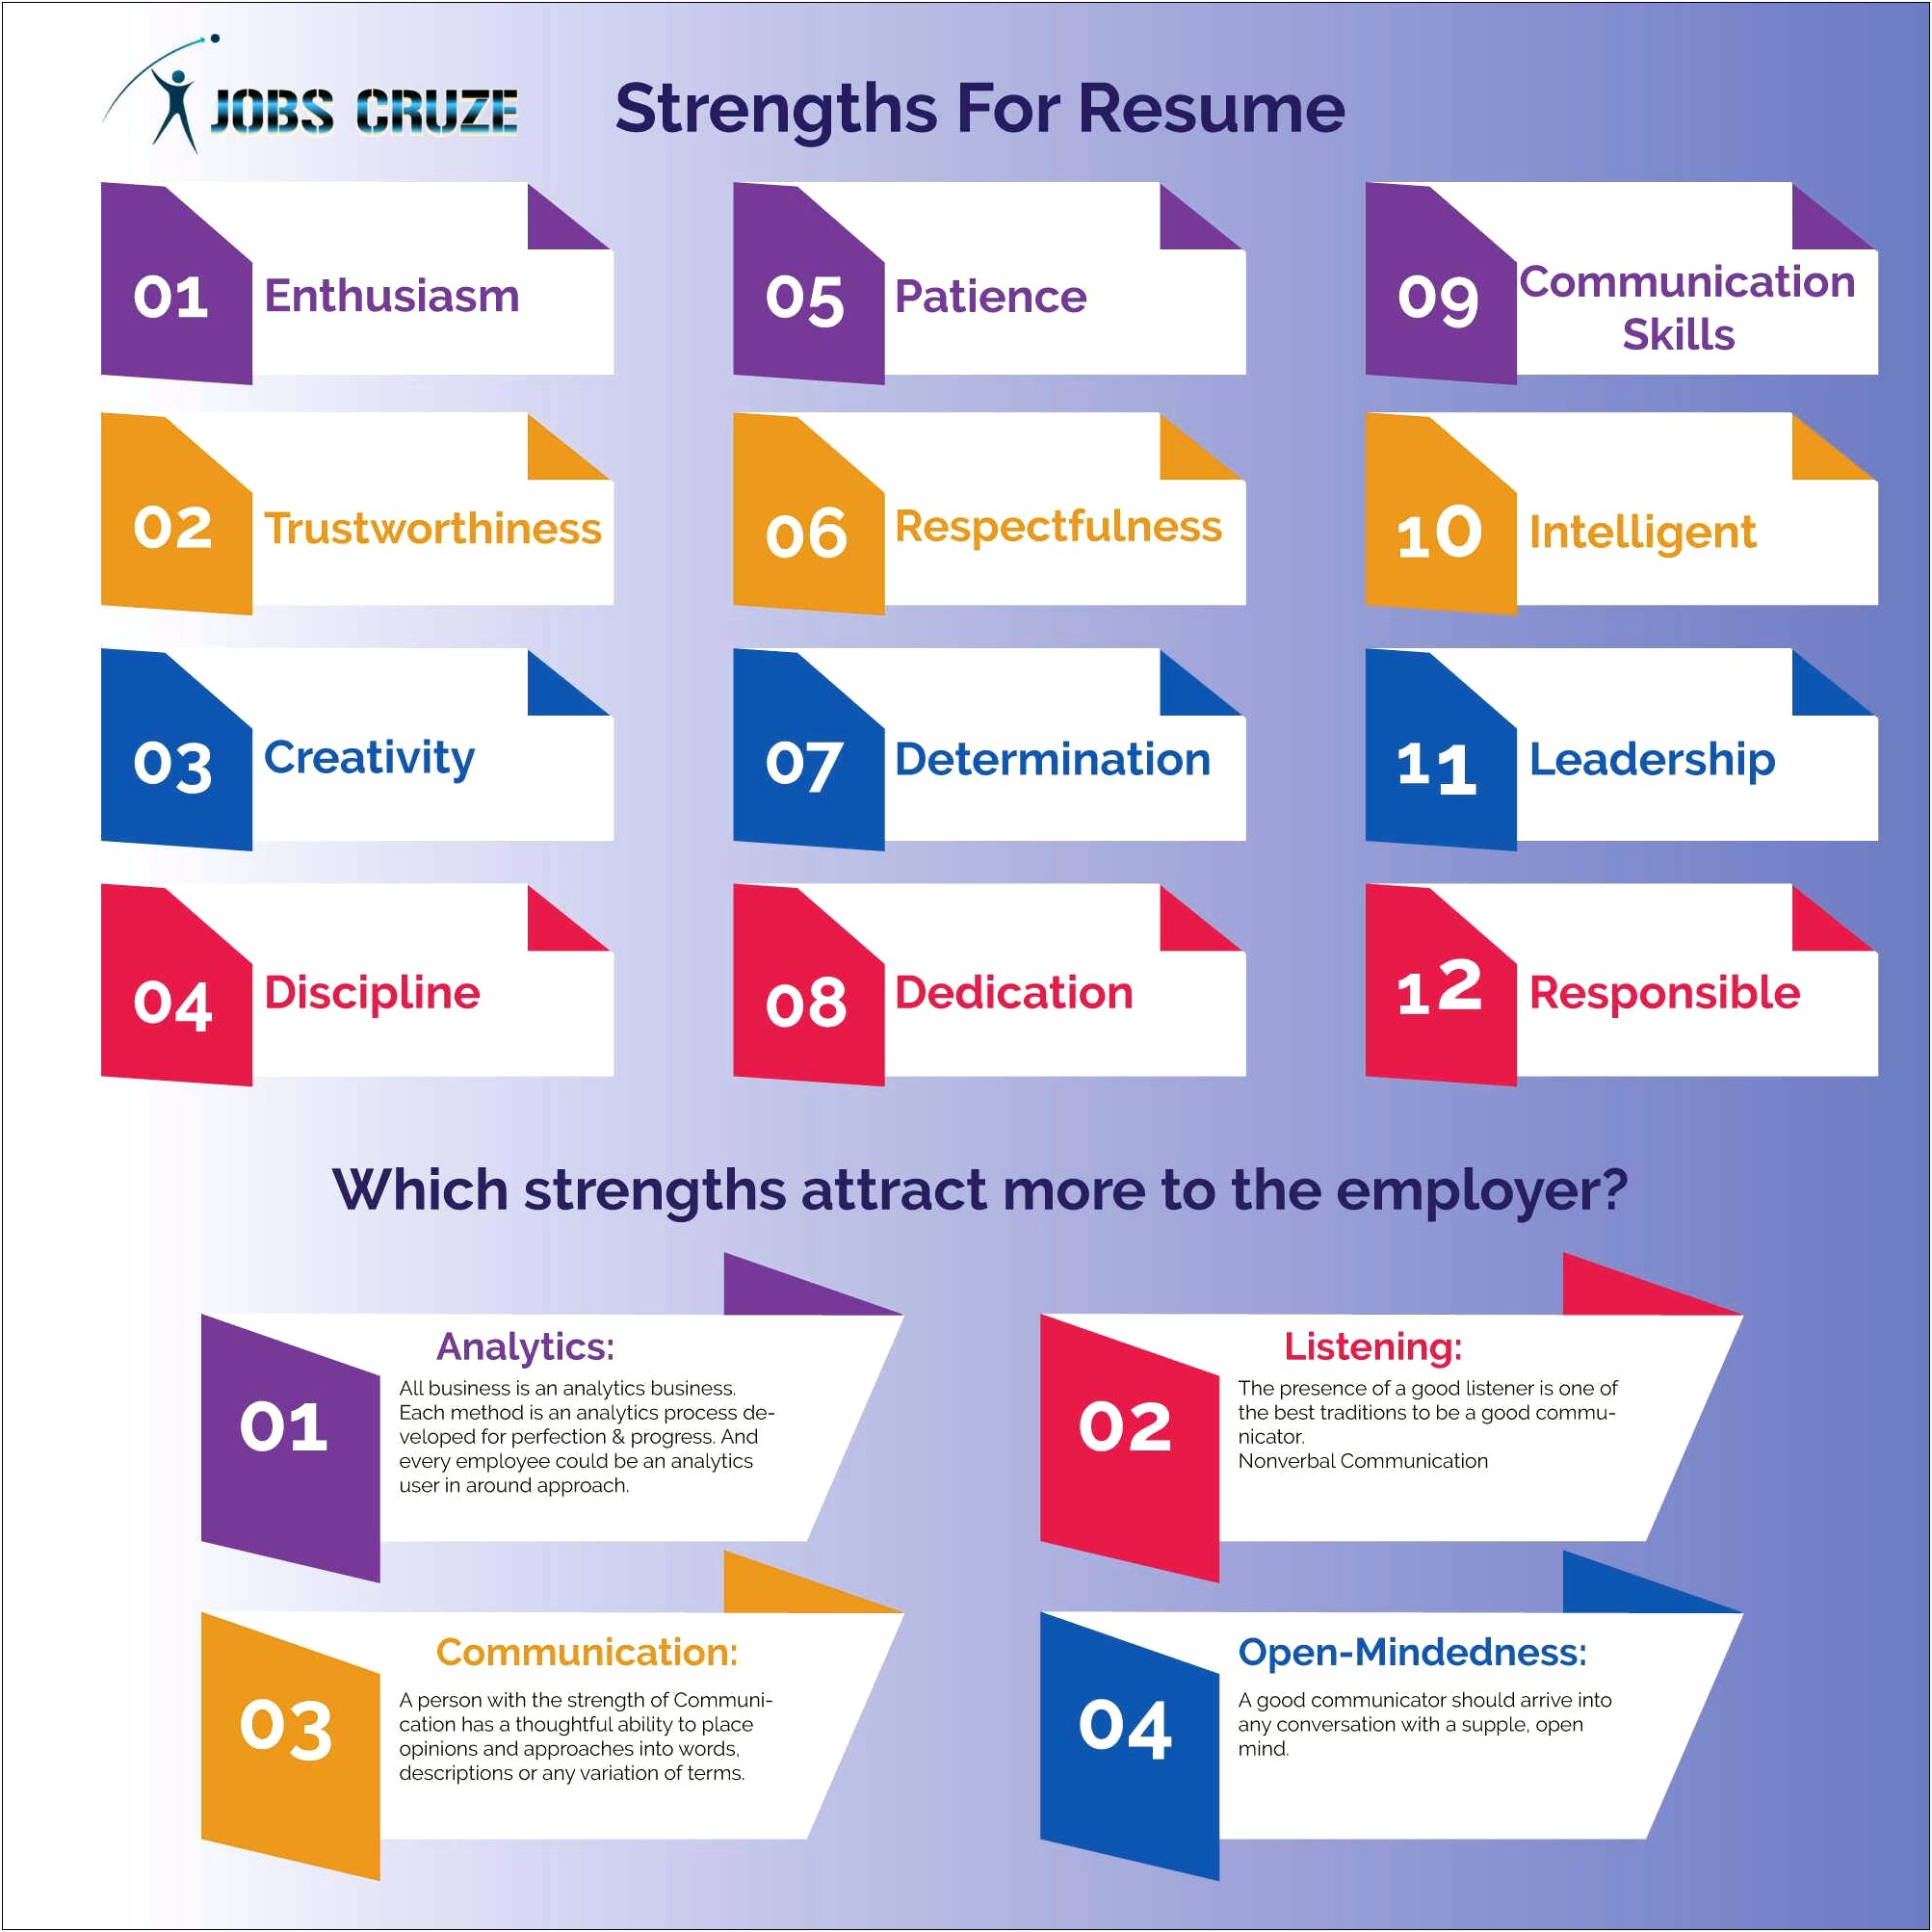 Best Strengths To List On A Resume